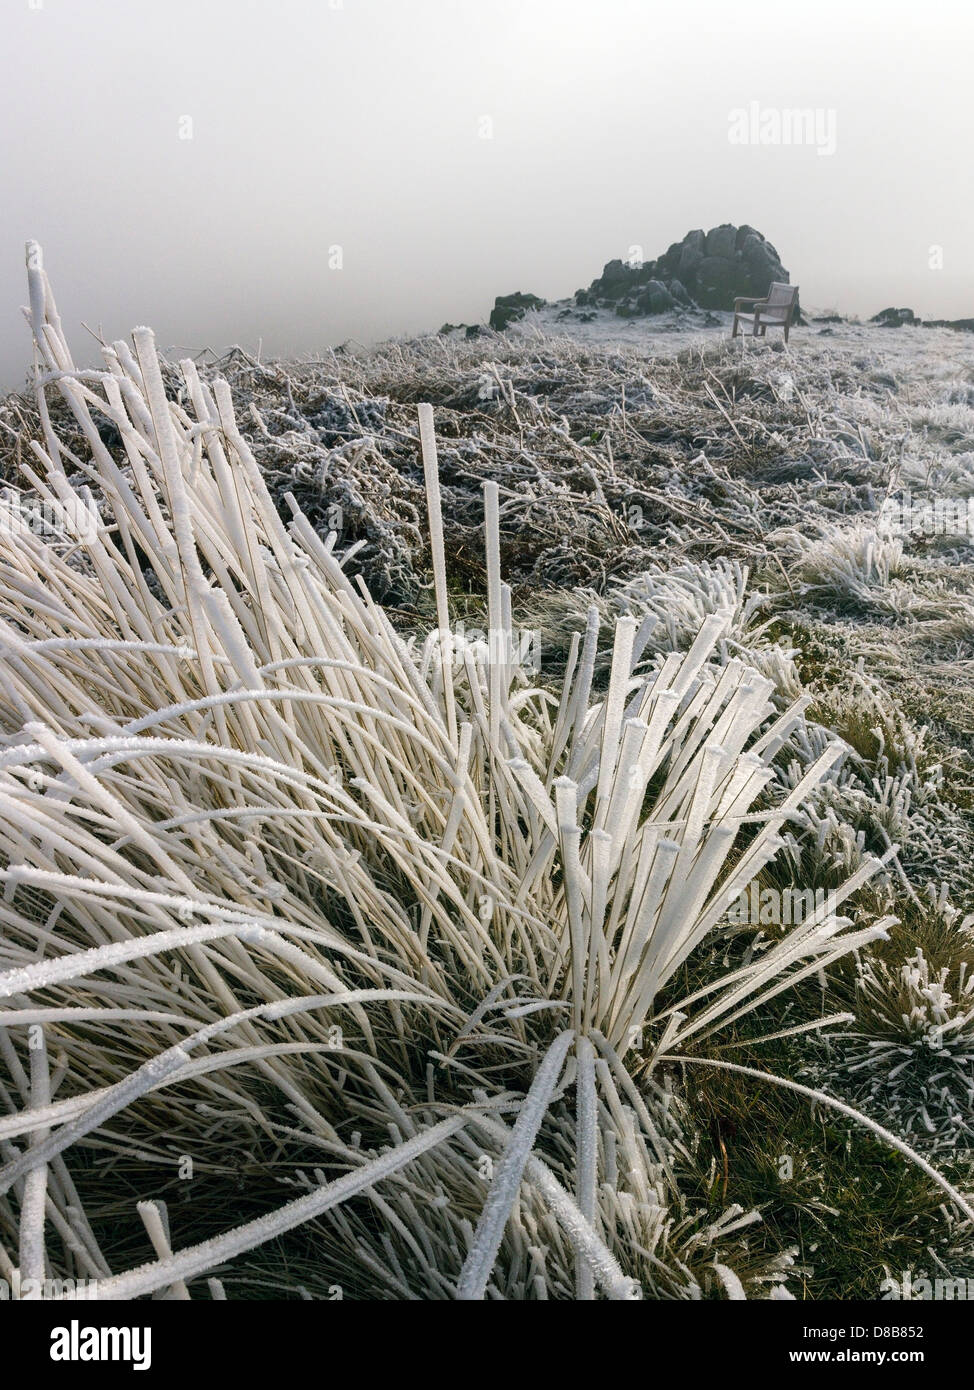 Wild grass covered in hoar frost, Bradgate park, Leicester, England, UK Stock Photo